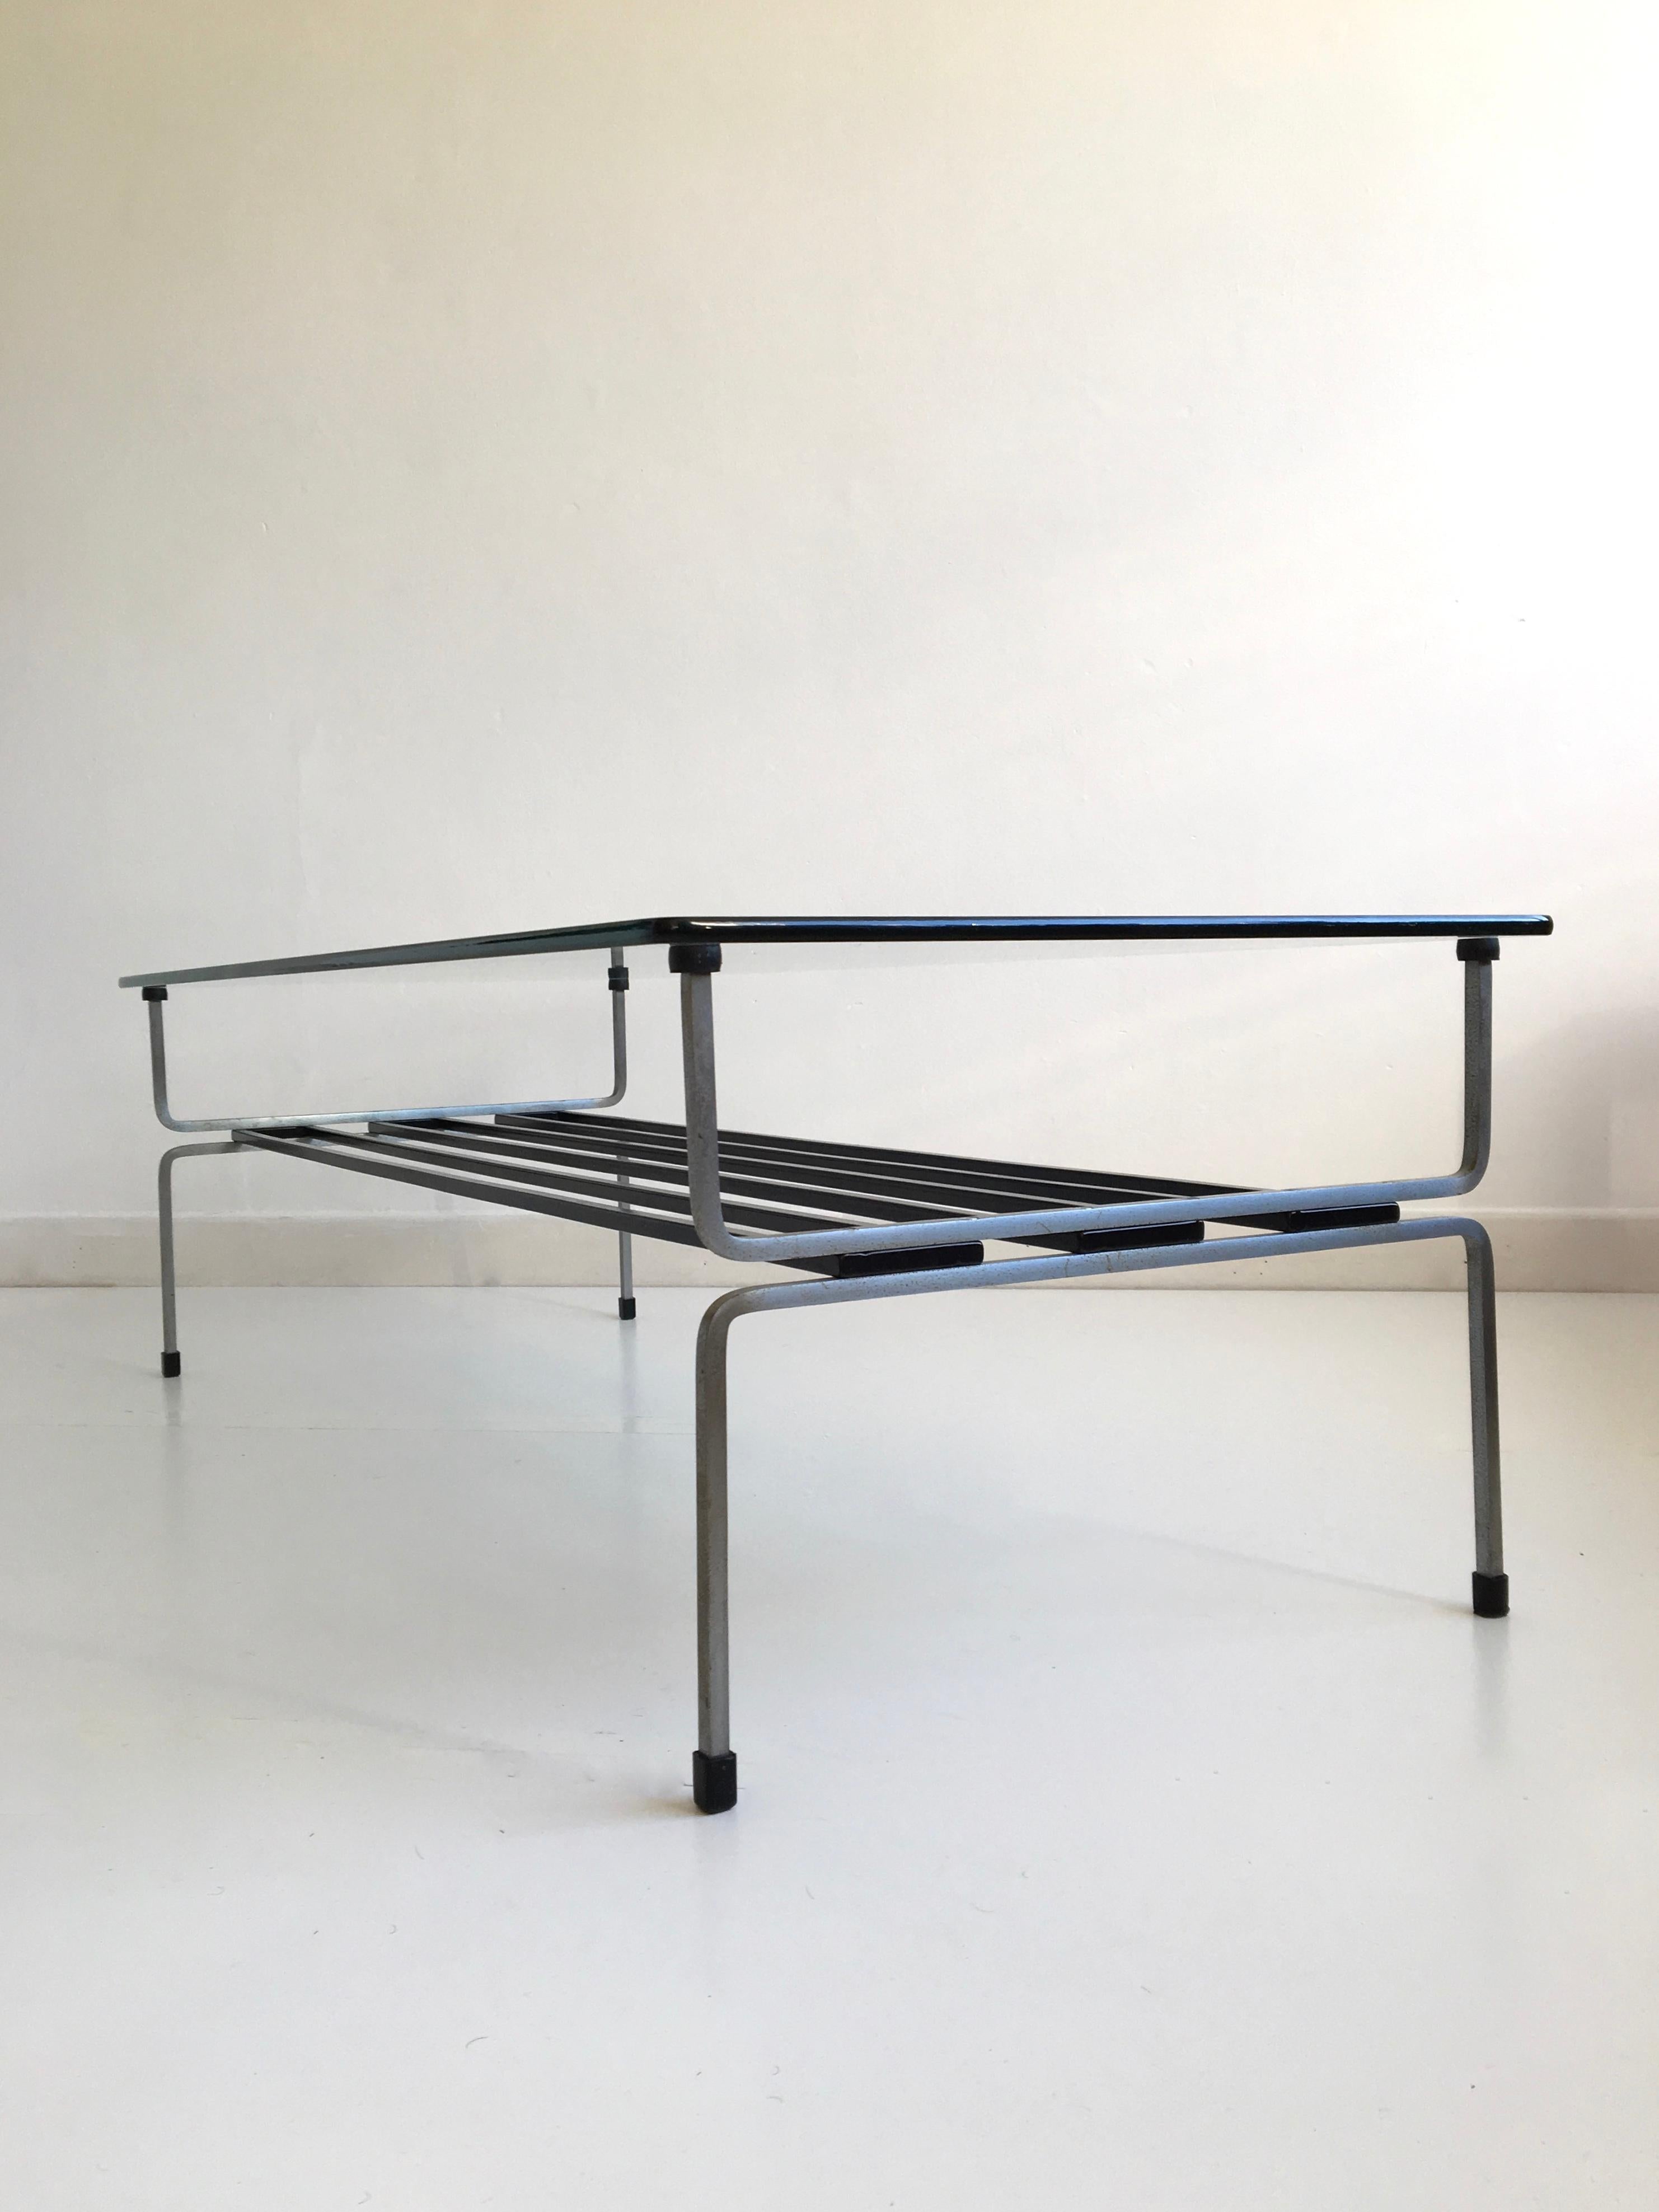 Metal Midcentury Glass and Steel Coffee Table by William Plunkett, England, circa 1960